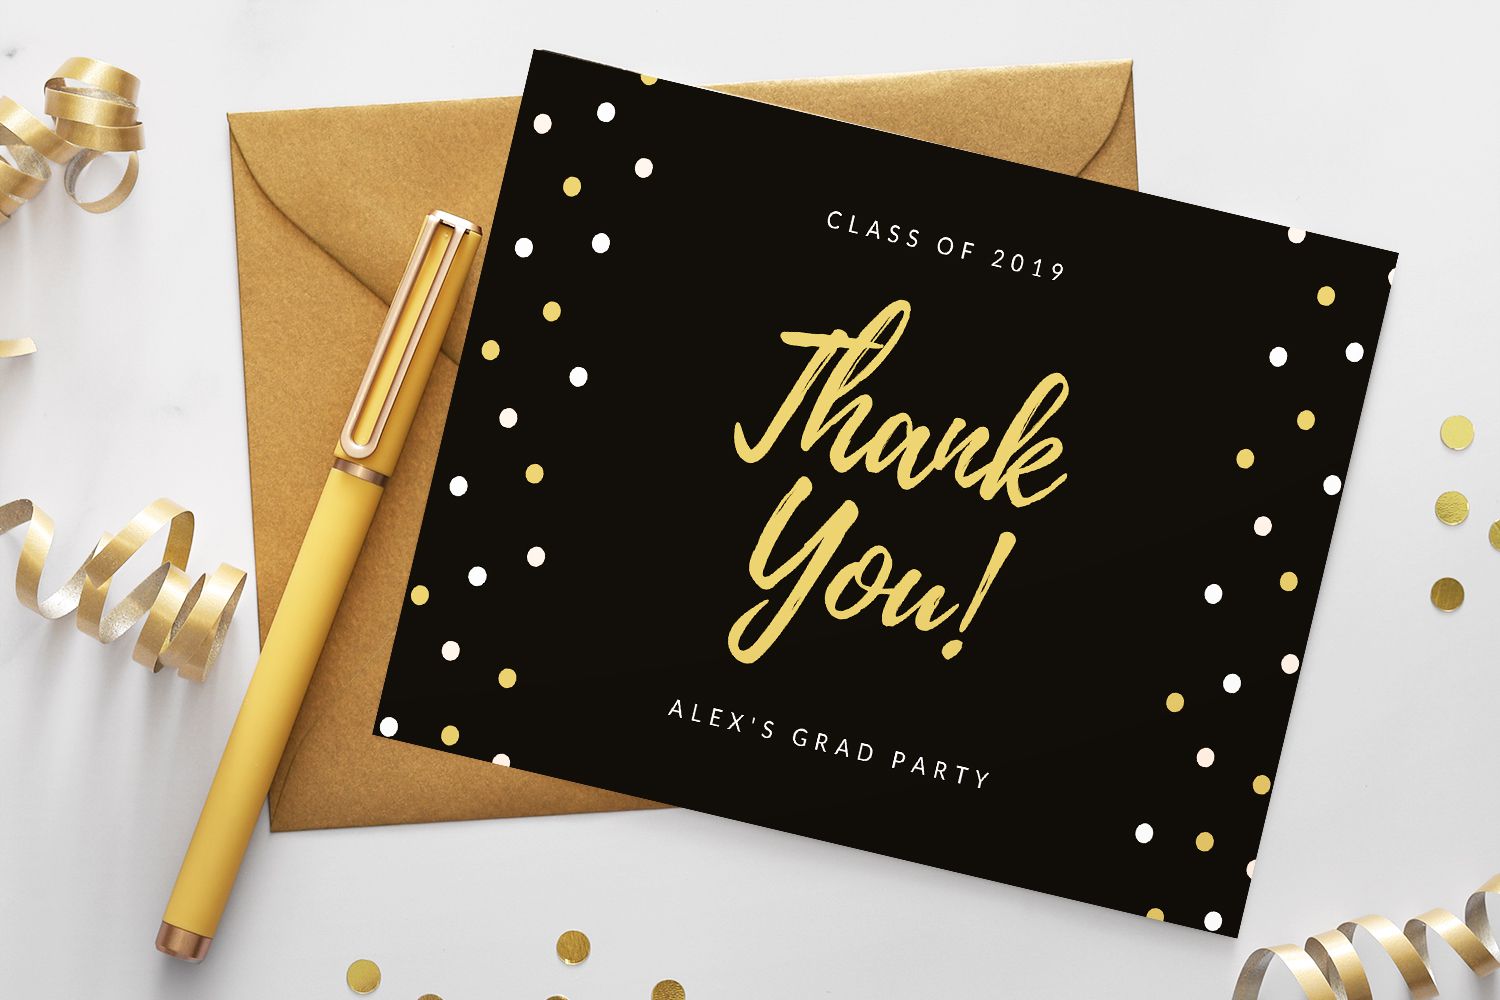 Appreciation In Style With Amazing Custom Thank You Cards 4OVER4 COM Marketing Cloud